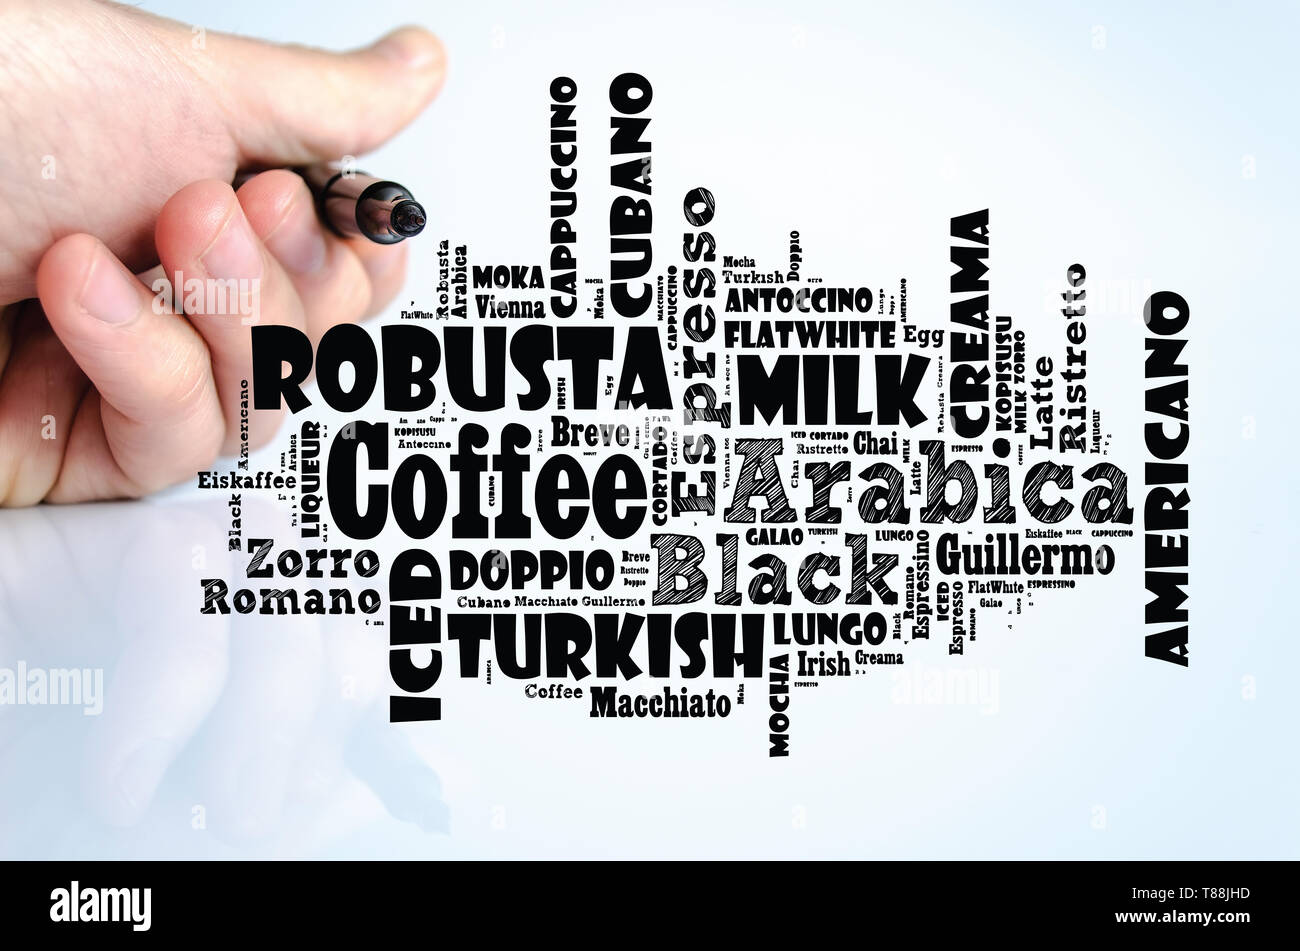 Coffee drinks words cloud collage over white background Stock Photo